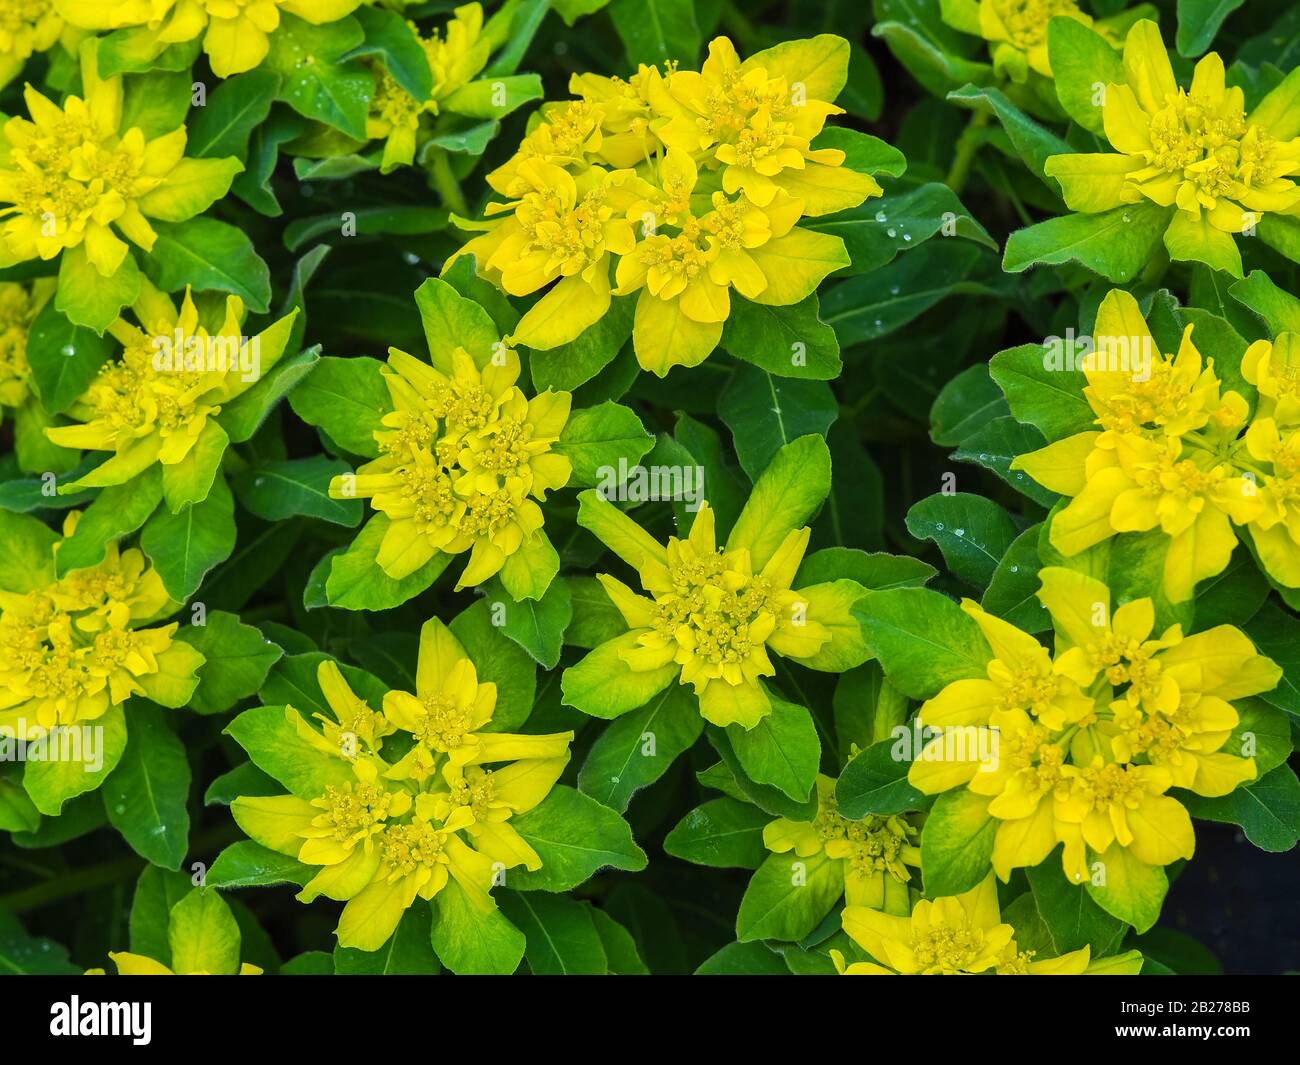 Euphorbia polychroma plant with yellow flowers and green leaves seen from above Stock Photo